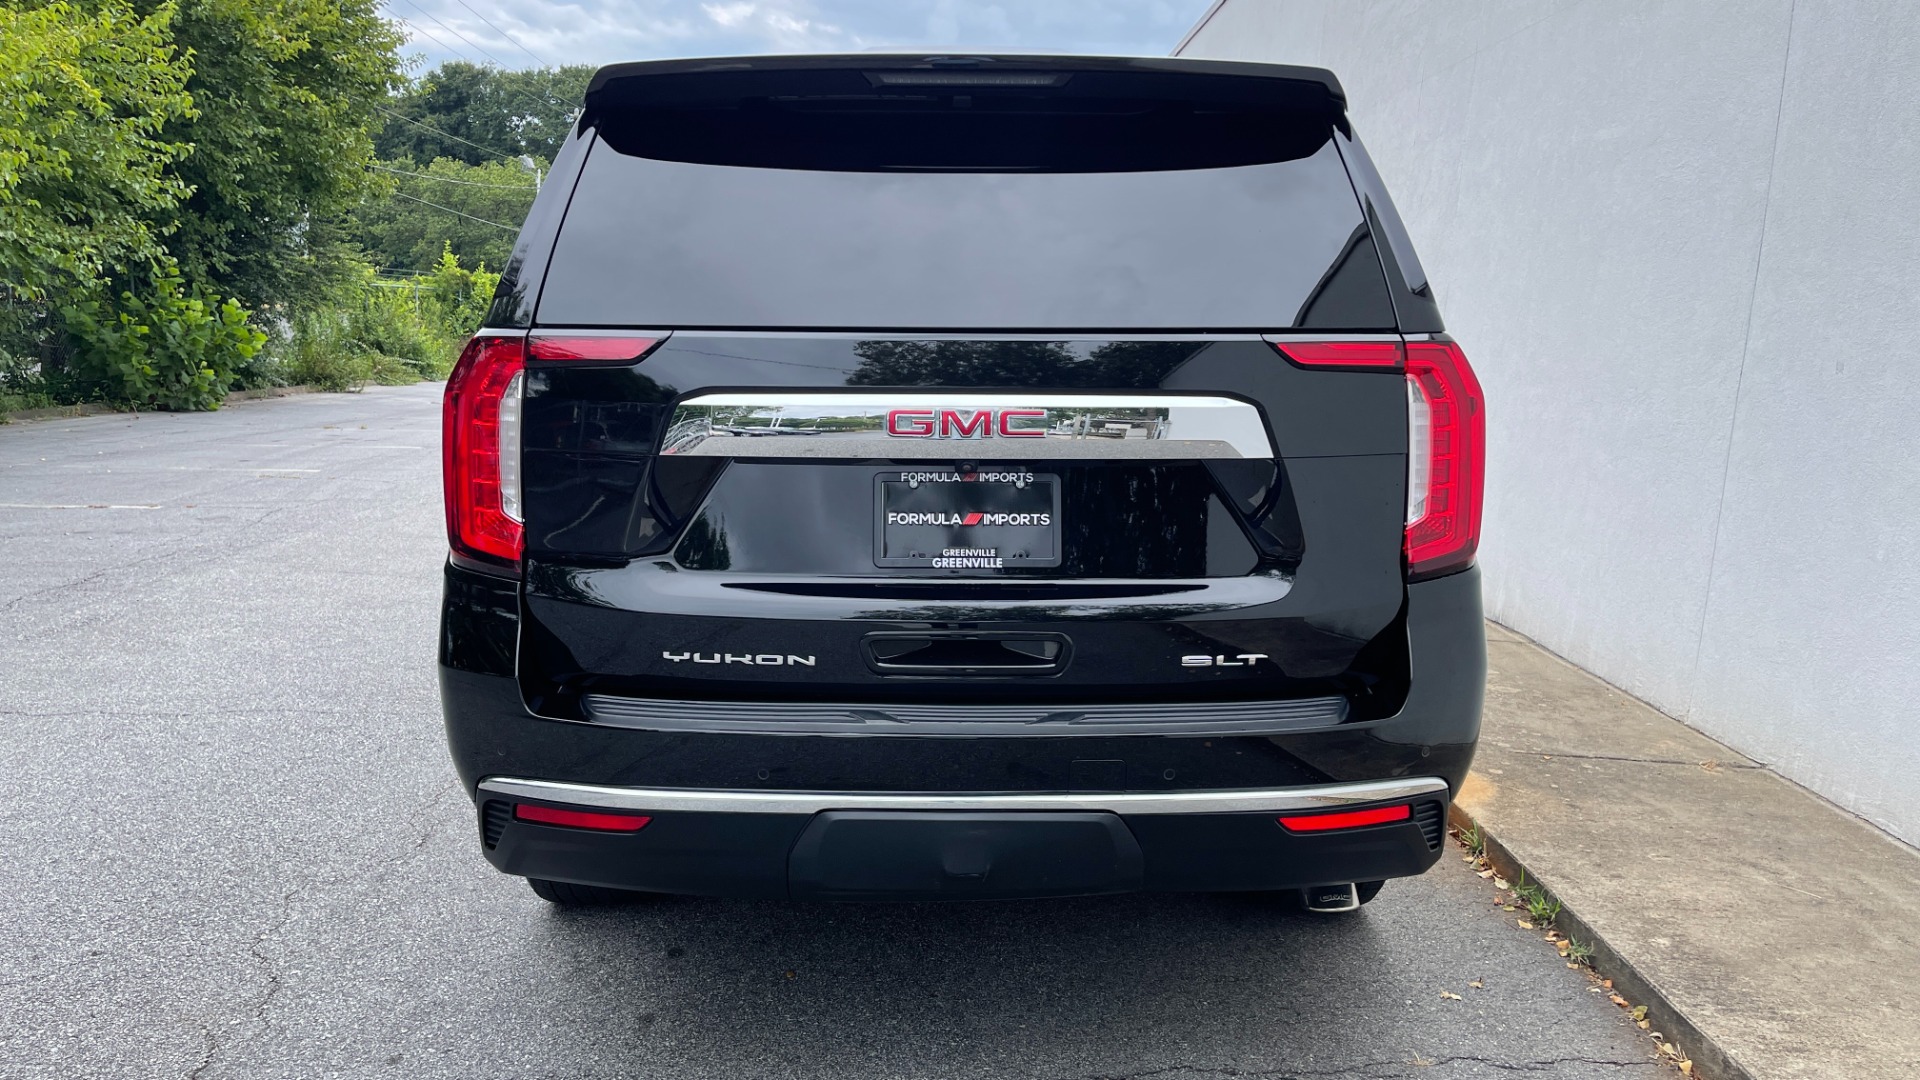 Used 2021 GMC Yukon SLT / REAR ENTERTAINMENT / 22IN WHEELS / LUXURY PLUS PACKAGE / 4WD for sale Sold at Formula Imports in Charlotte NC 28227 5